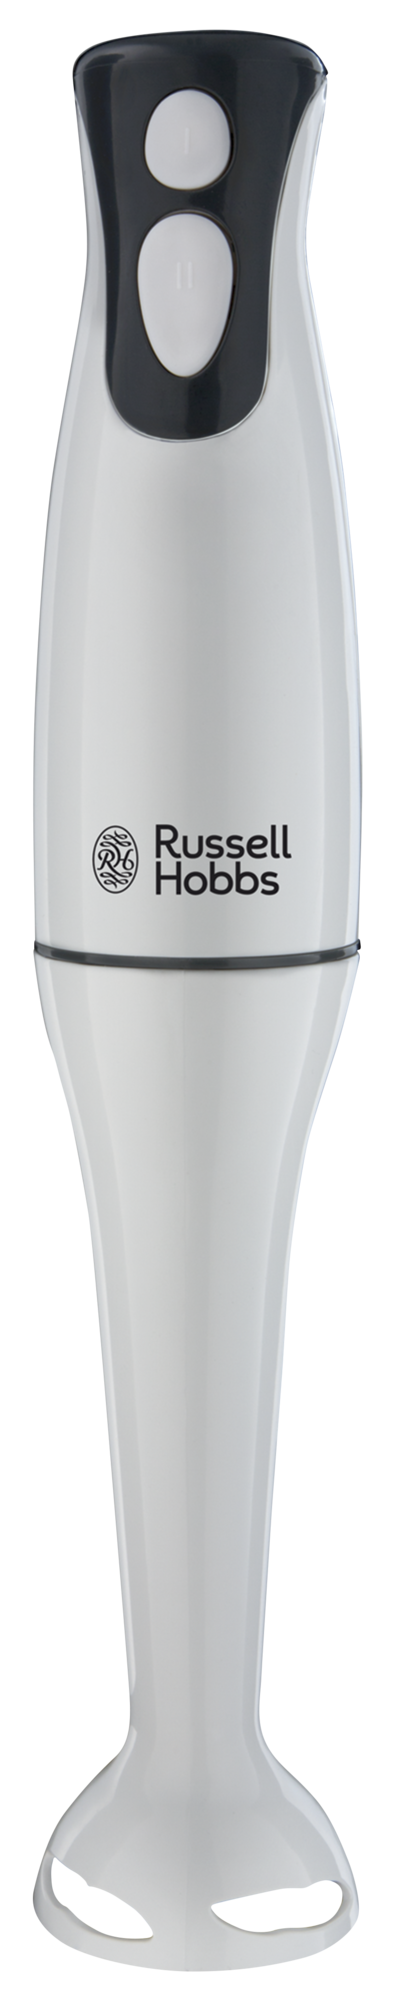 Russell Hobbs Food Collection Blender